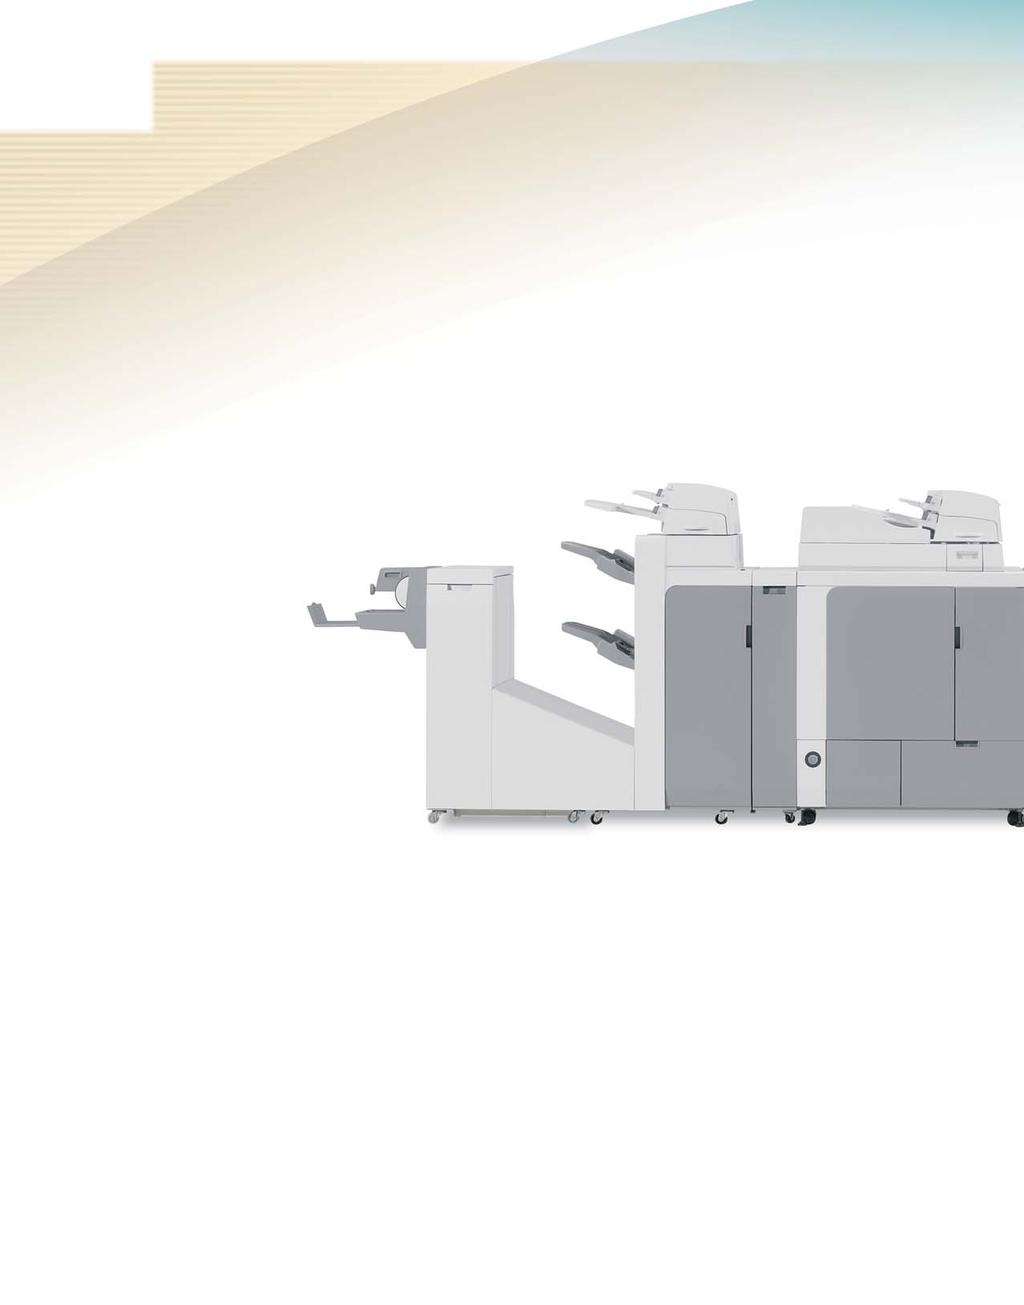 Challenge Your System Versatility Expectations The Finisher-V1 or Saddle Finisher-V2 provides the collating, stapling, saddlestitching and optional punching flexibility required for busy production